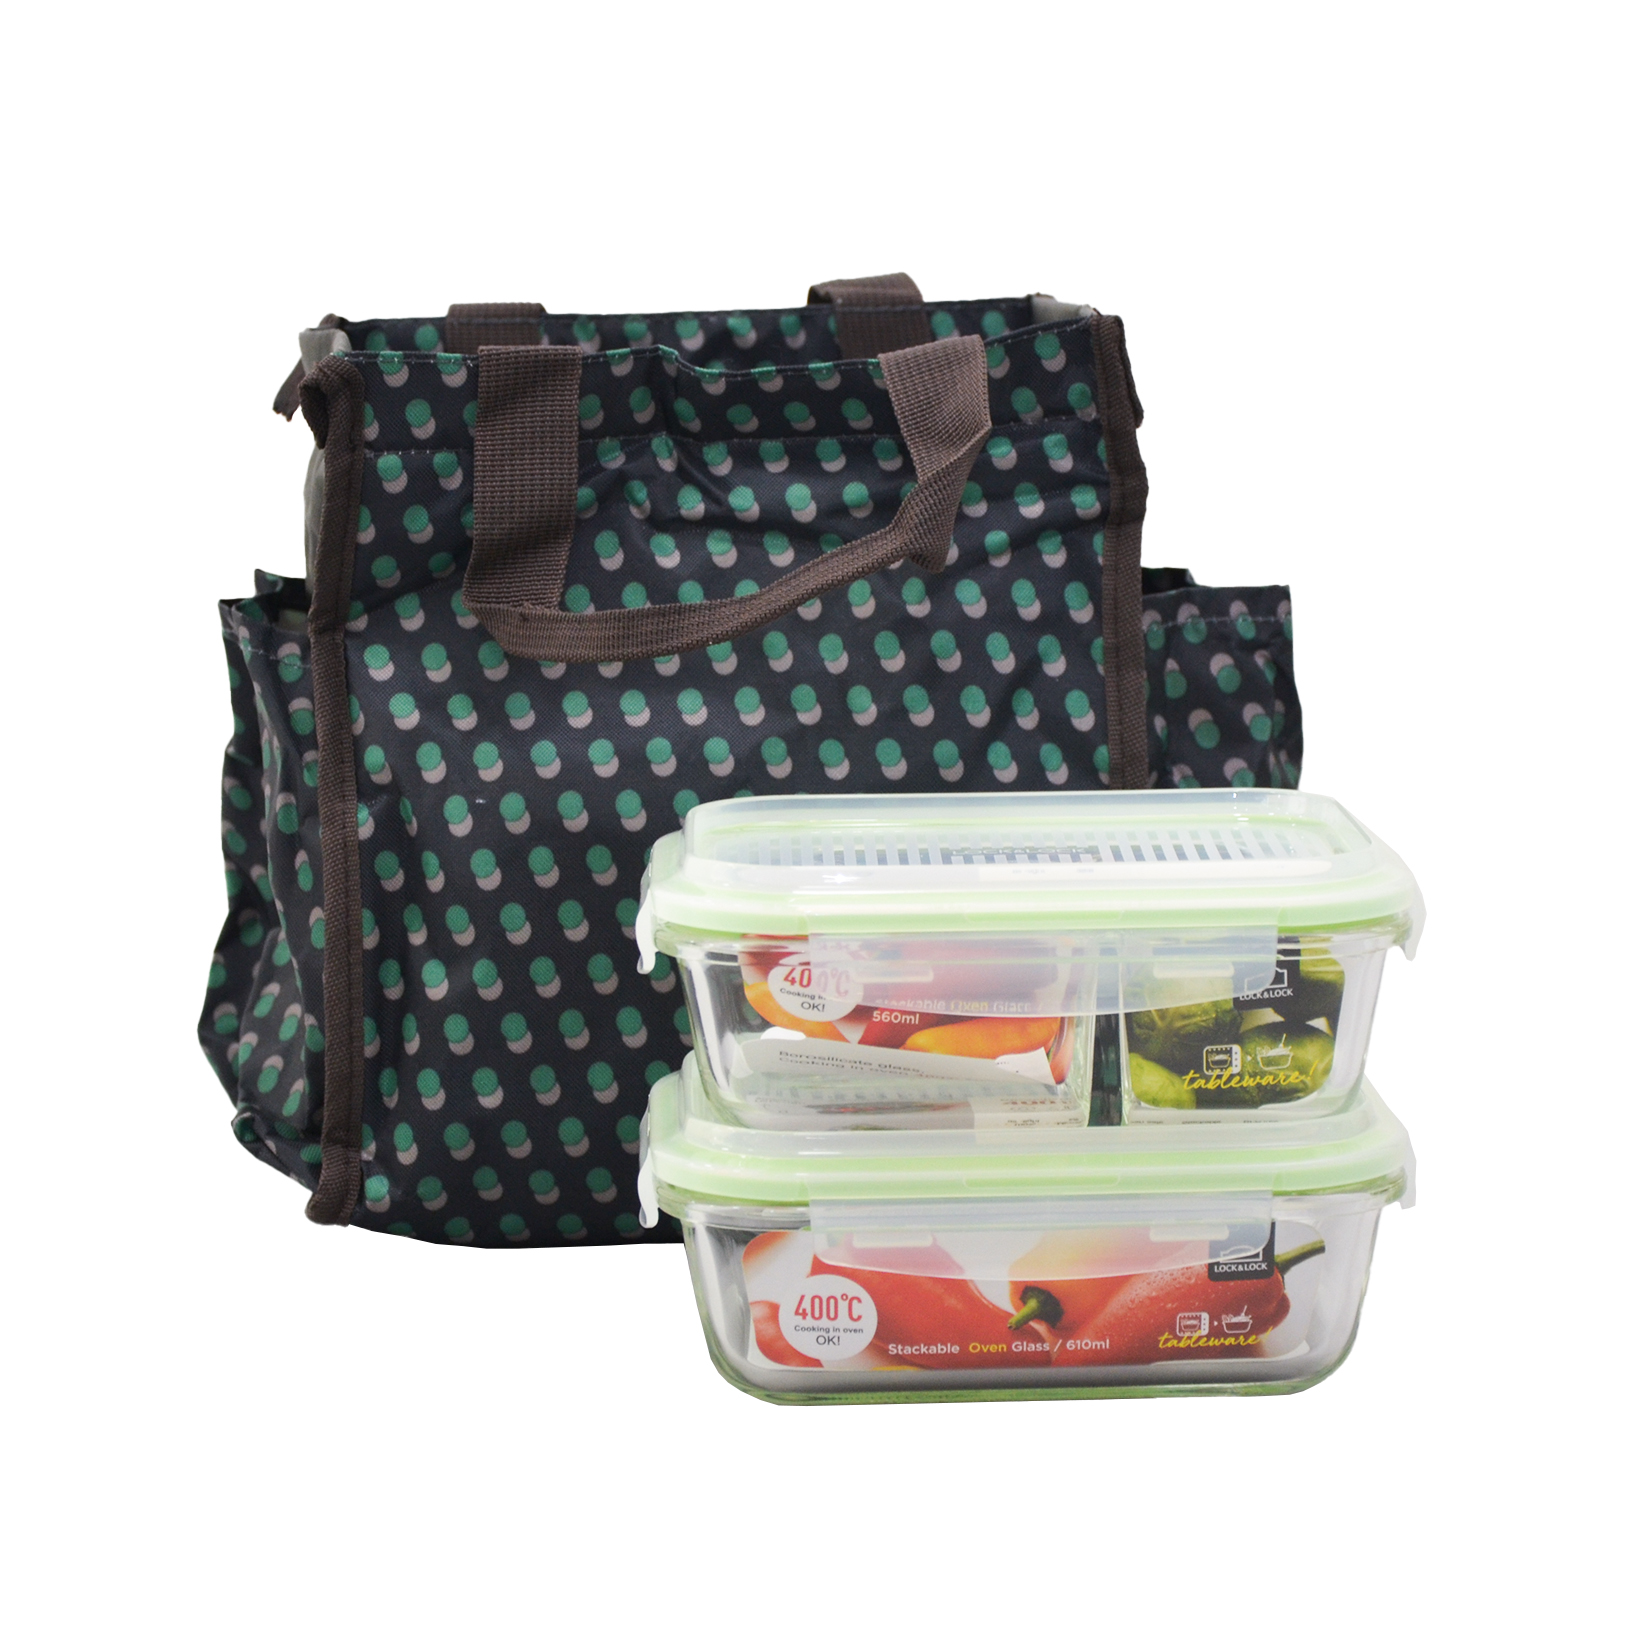 LLG990 + LLG990CSTACKABLE GLASS CONTAINER + LUNCH BAG(W/2-SIDED POCKET) + HANG TAG